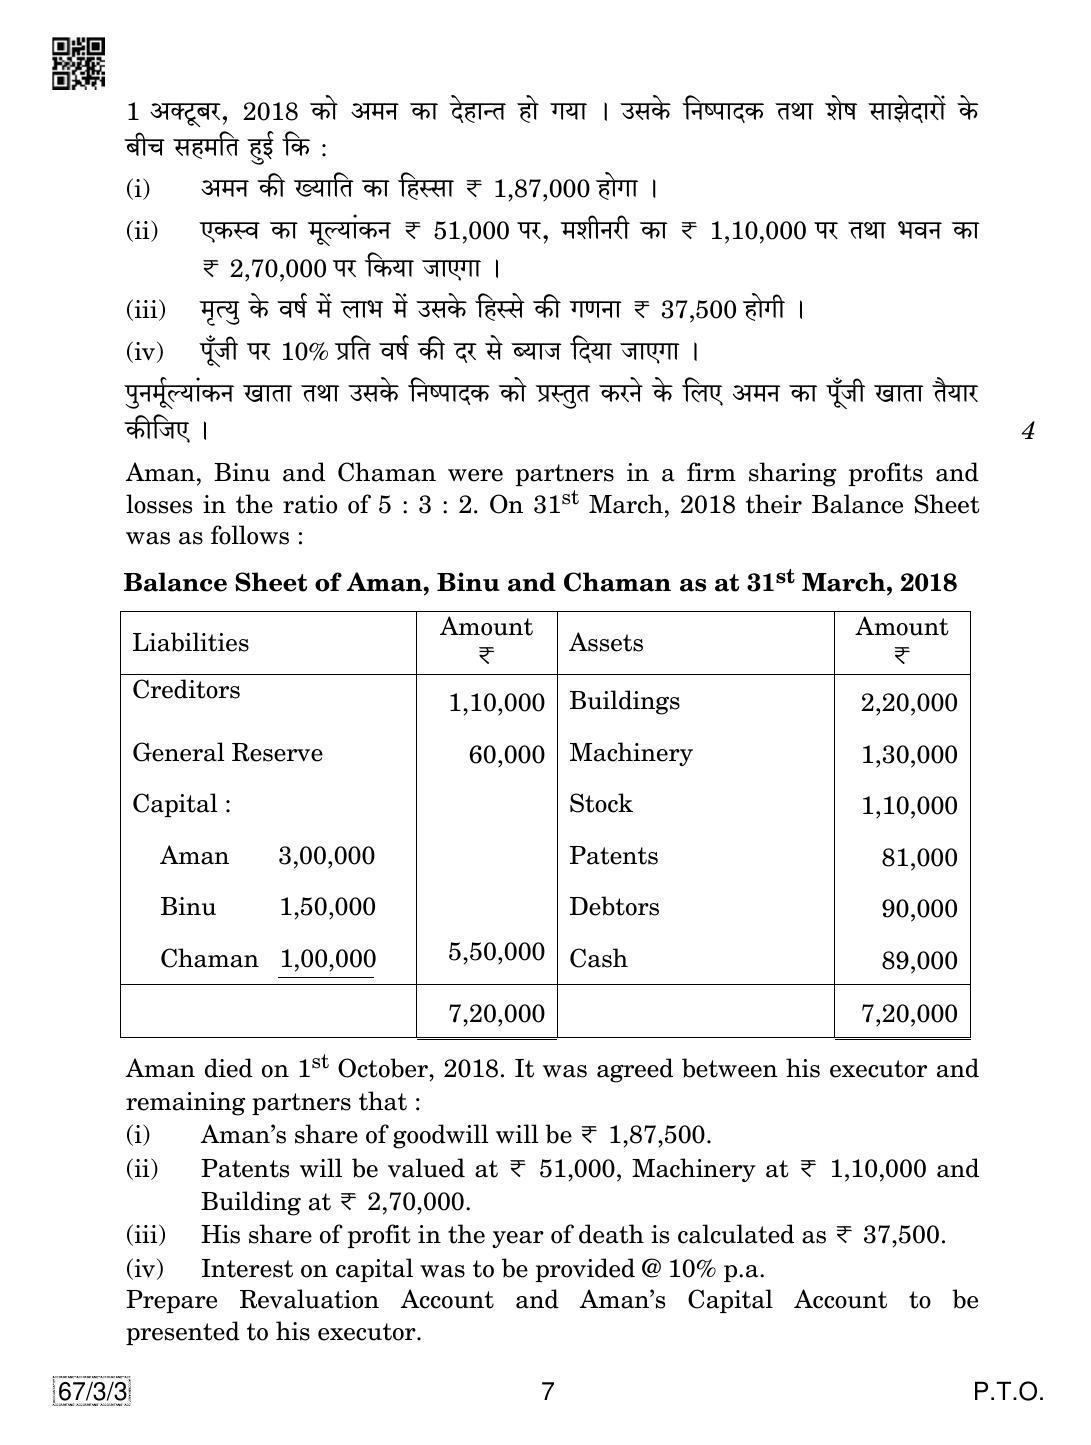 CBSE Class 12 67-3-3 Accountancy 2019 Question Paper - Page 7